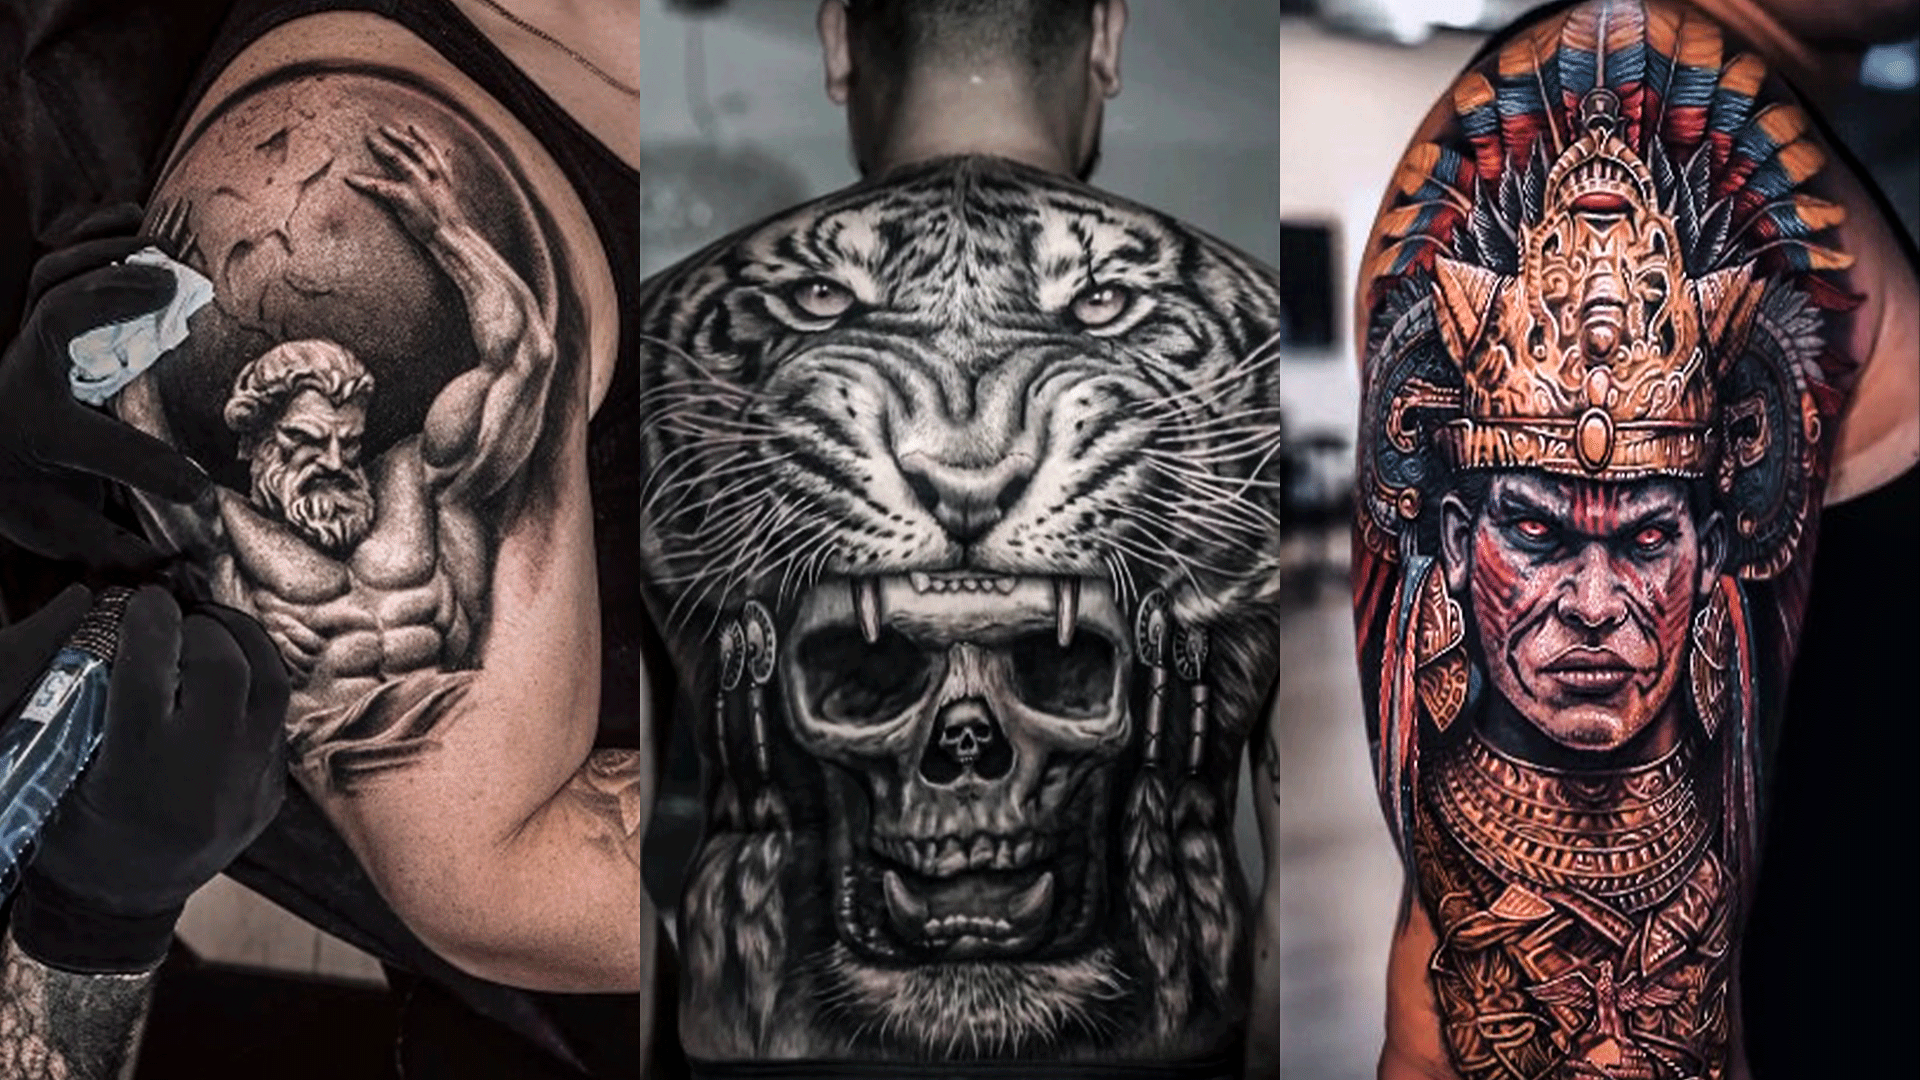 40 cool arm tattoos for guys | arm tattoos - YouTube